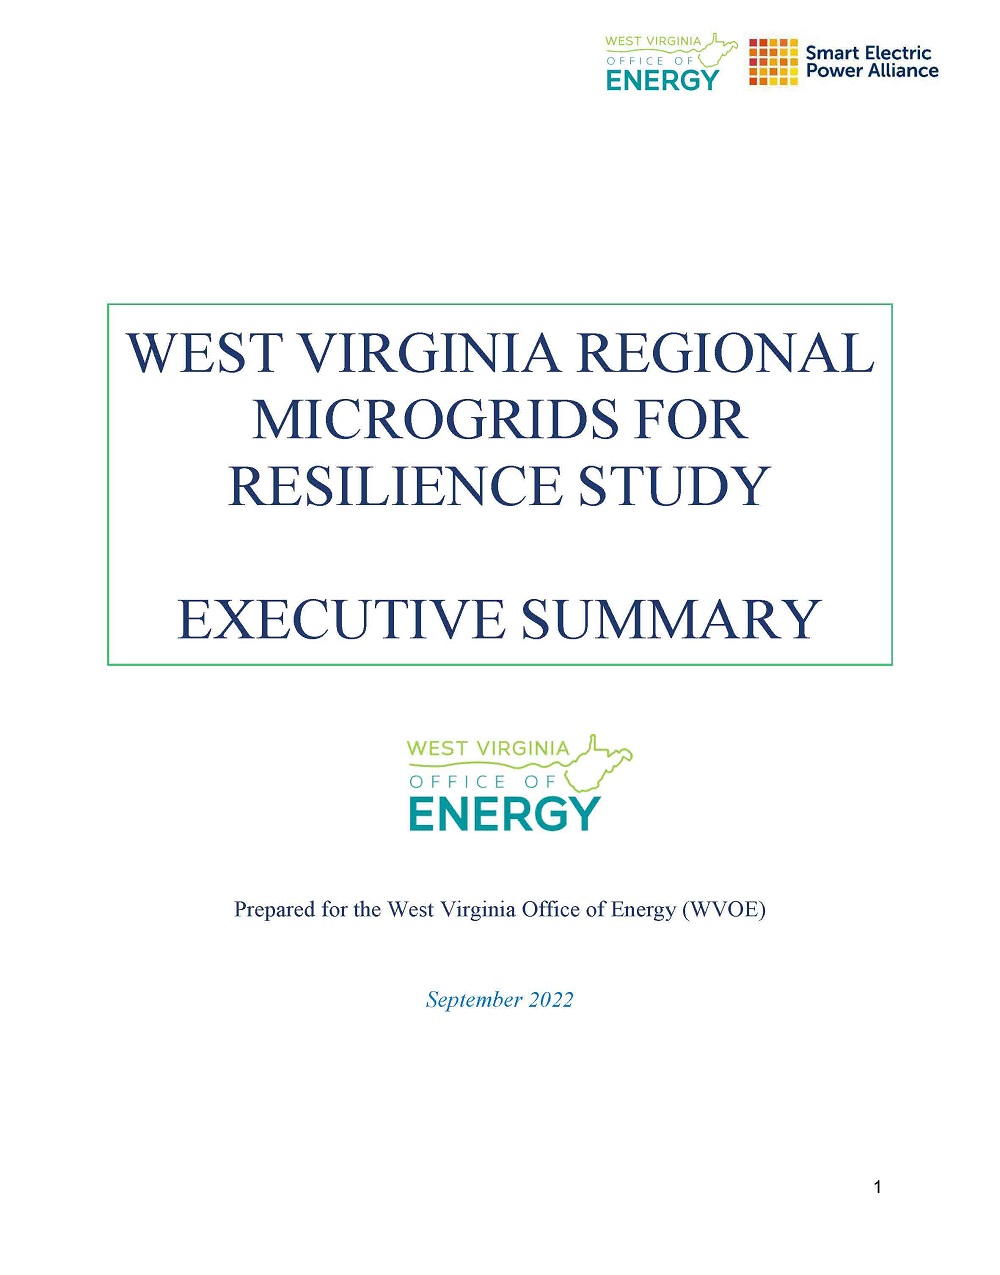 West Virginia Regional Microgrids for Resilience Executive Summary